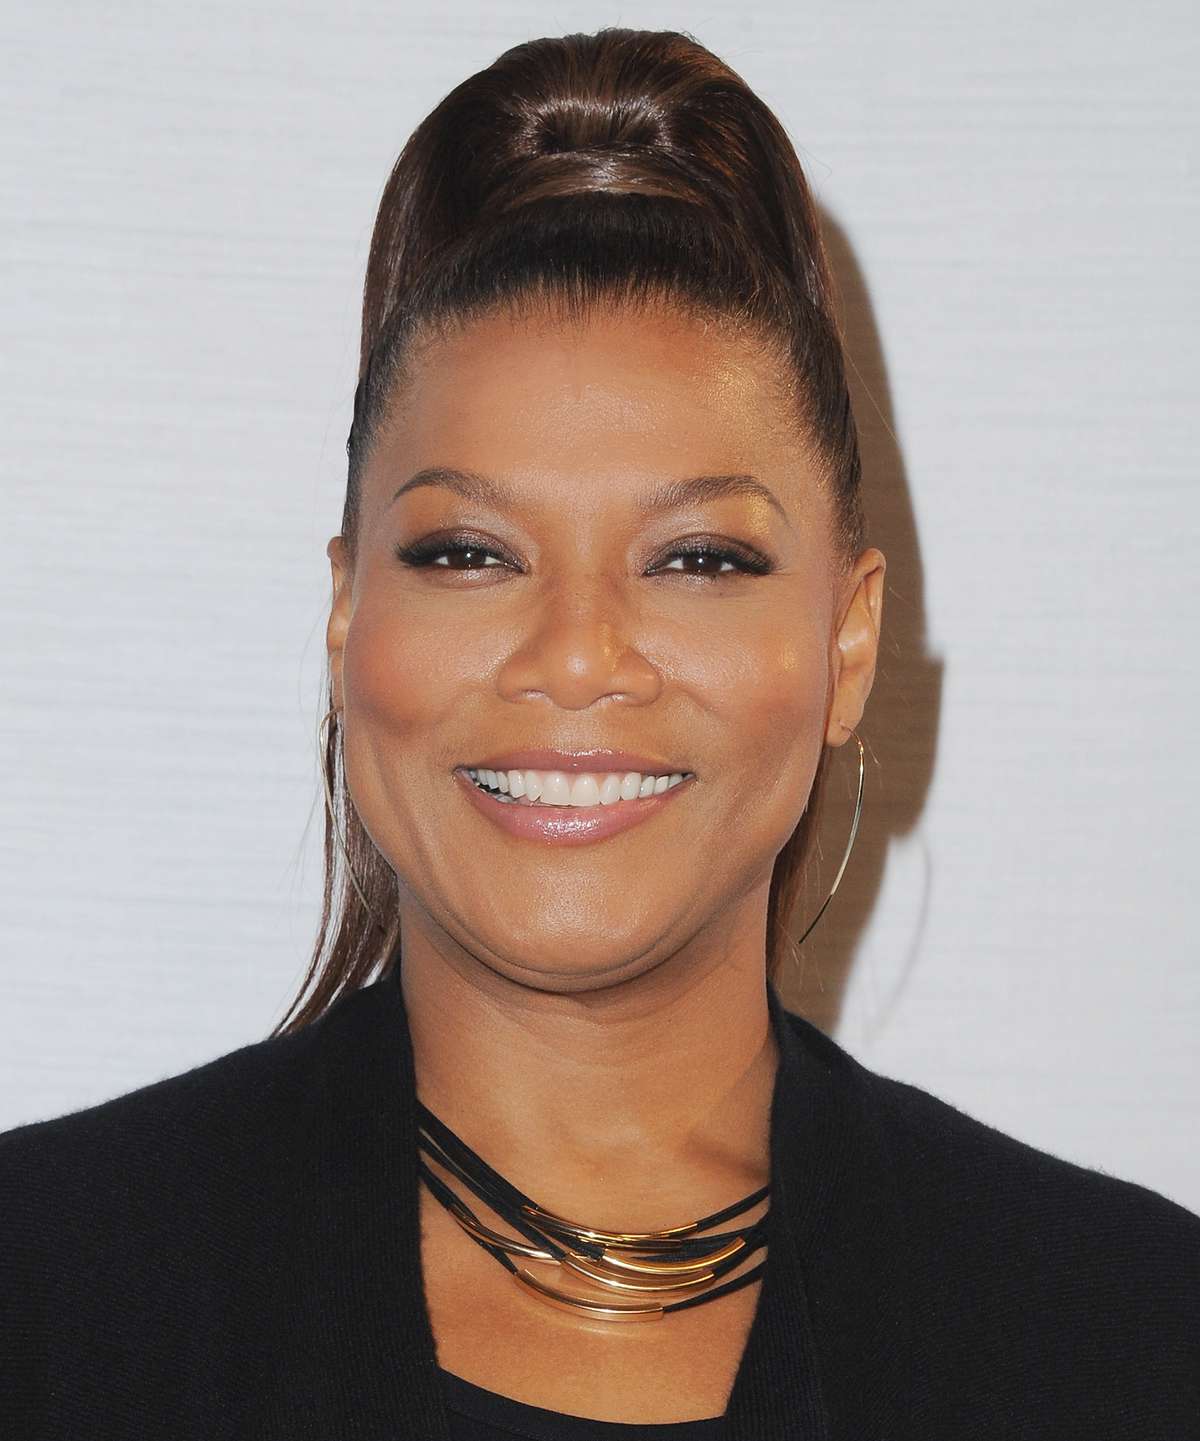 Actress Queen Latifah arrives at Sony Pictures Releasing's 'Miracles From Heaven' Photo Call at The London Hotel on March 4, 2016 in West Hollywood, California.